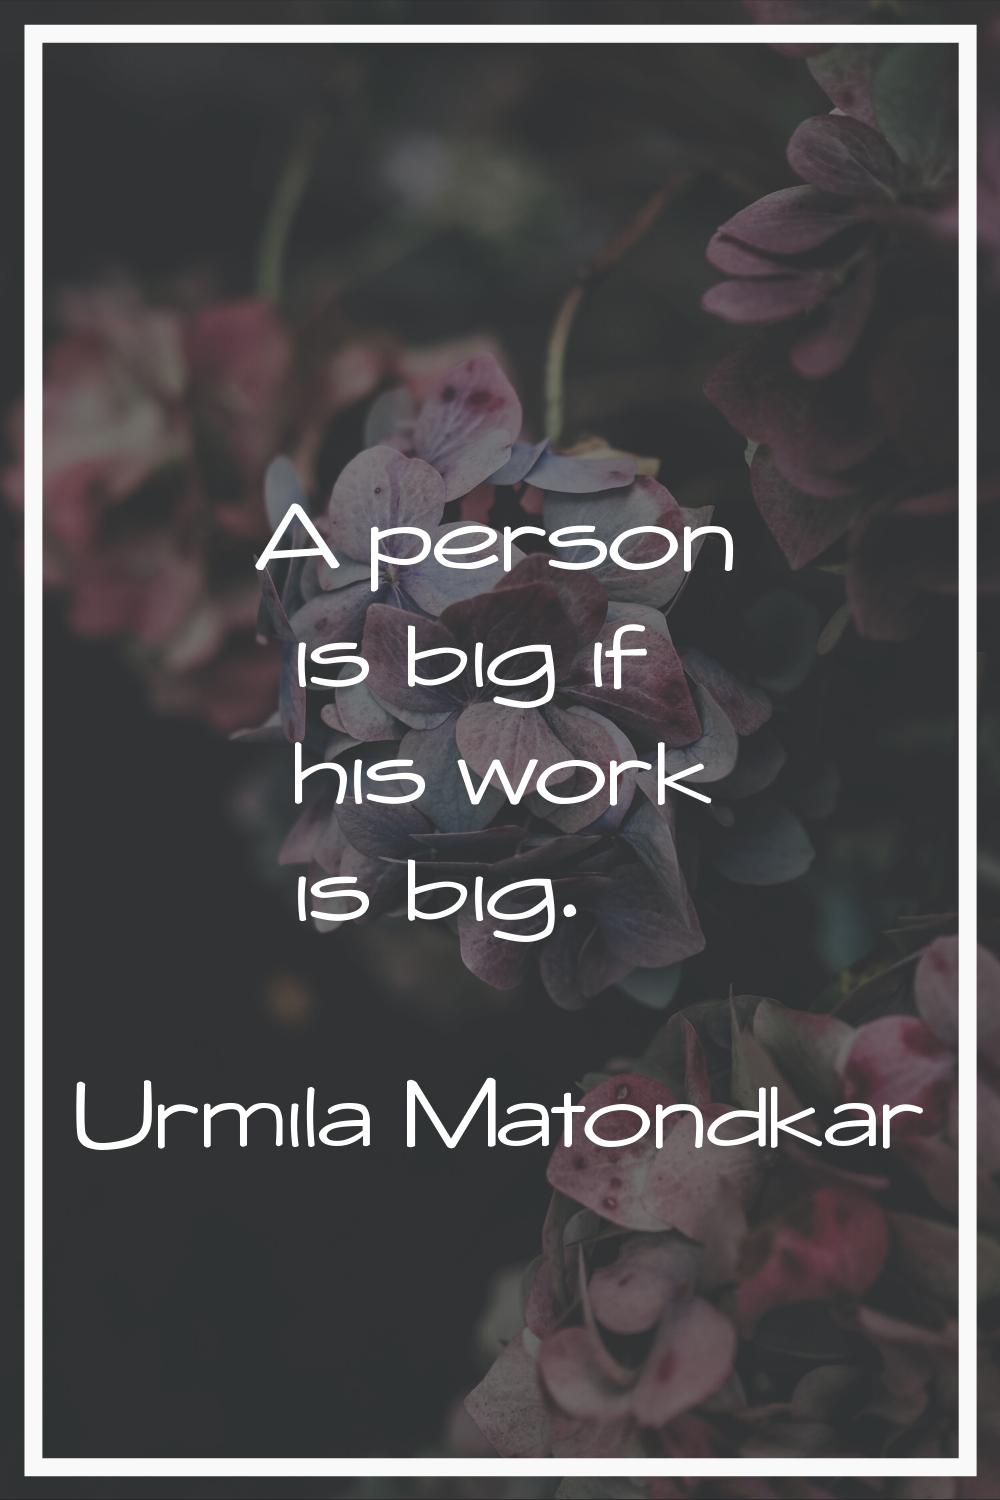 A person is big if his work is big.